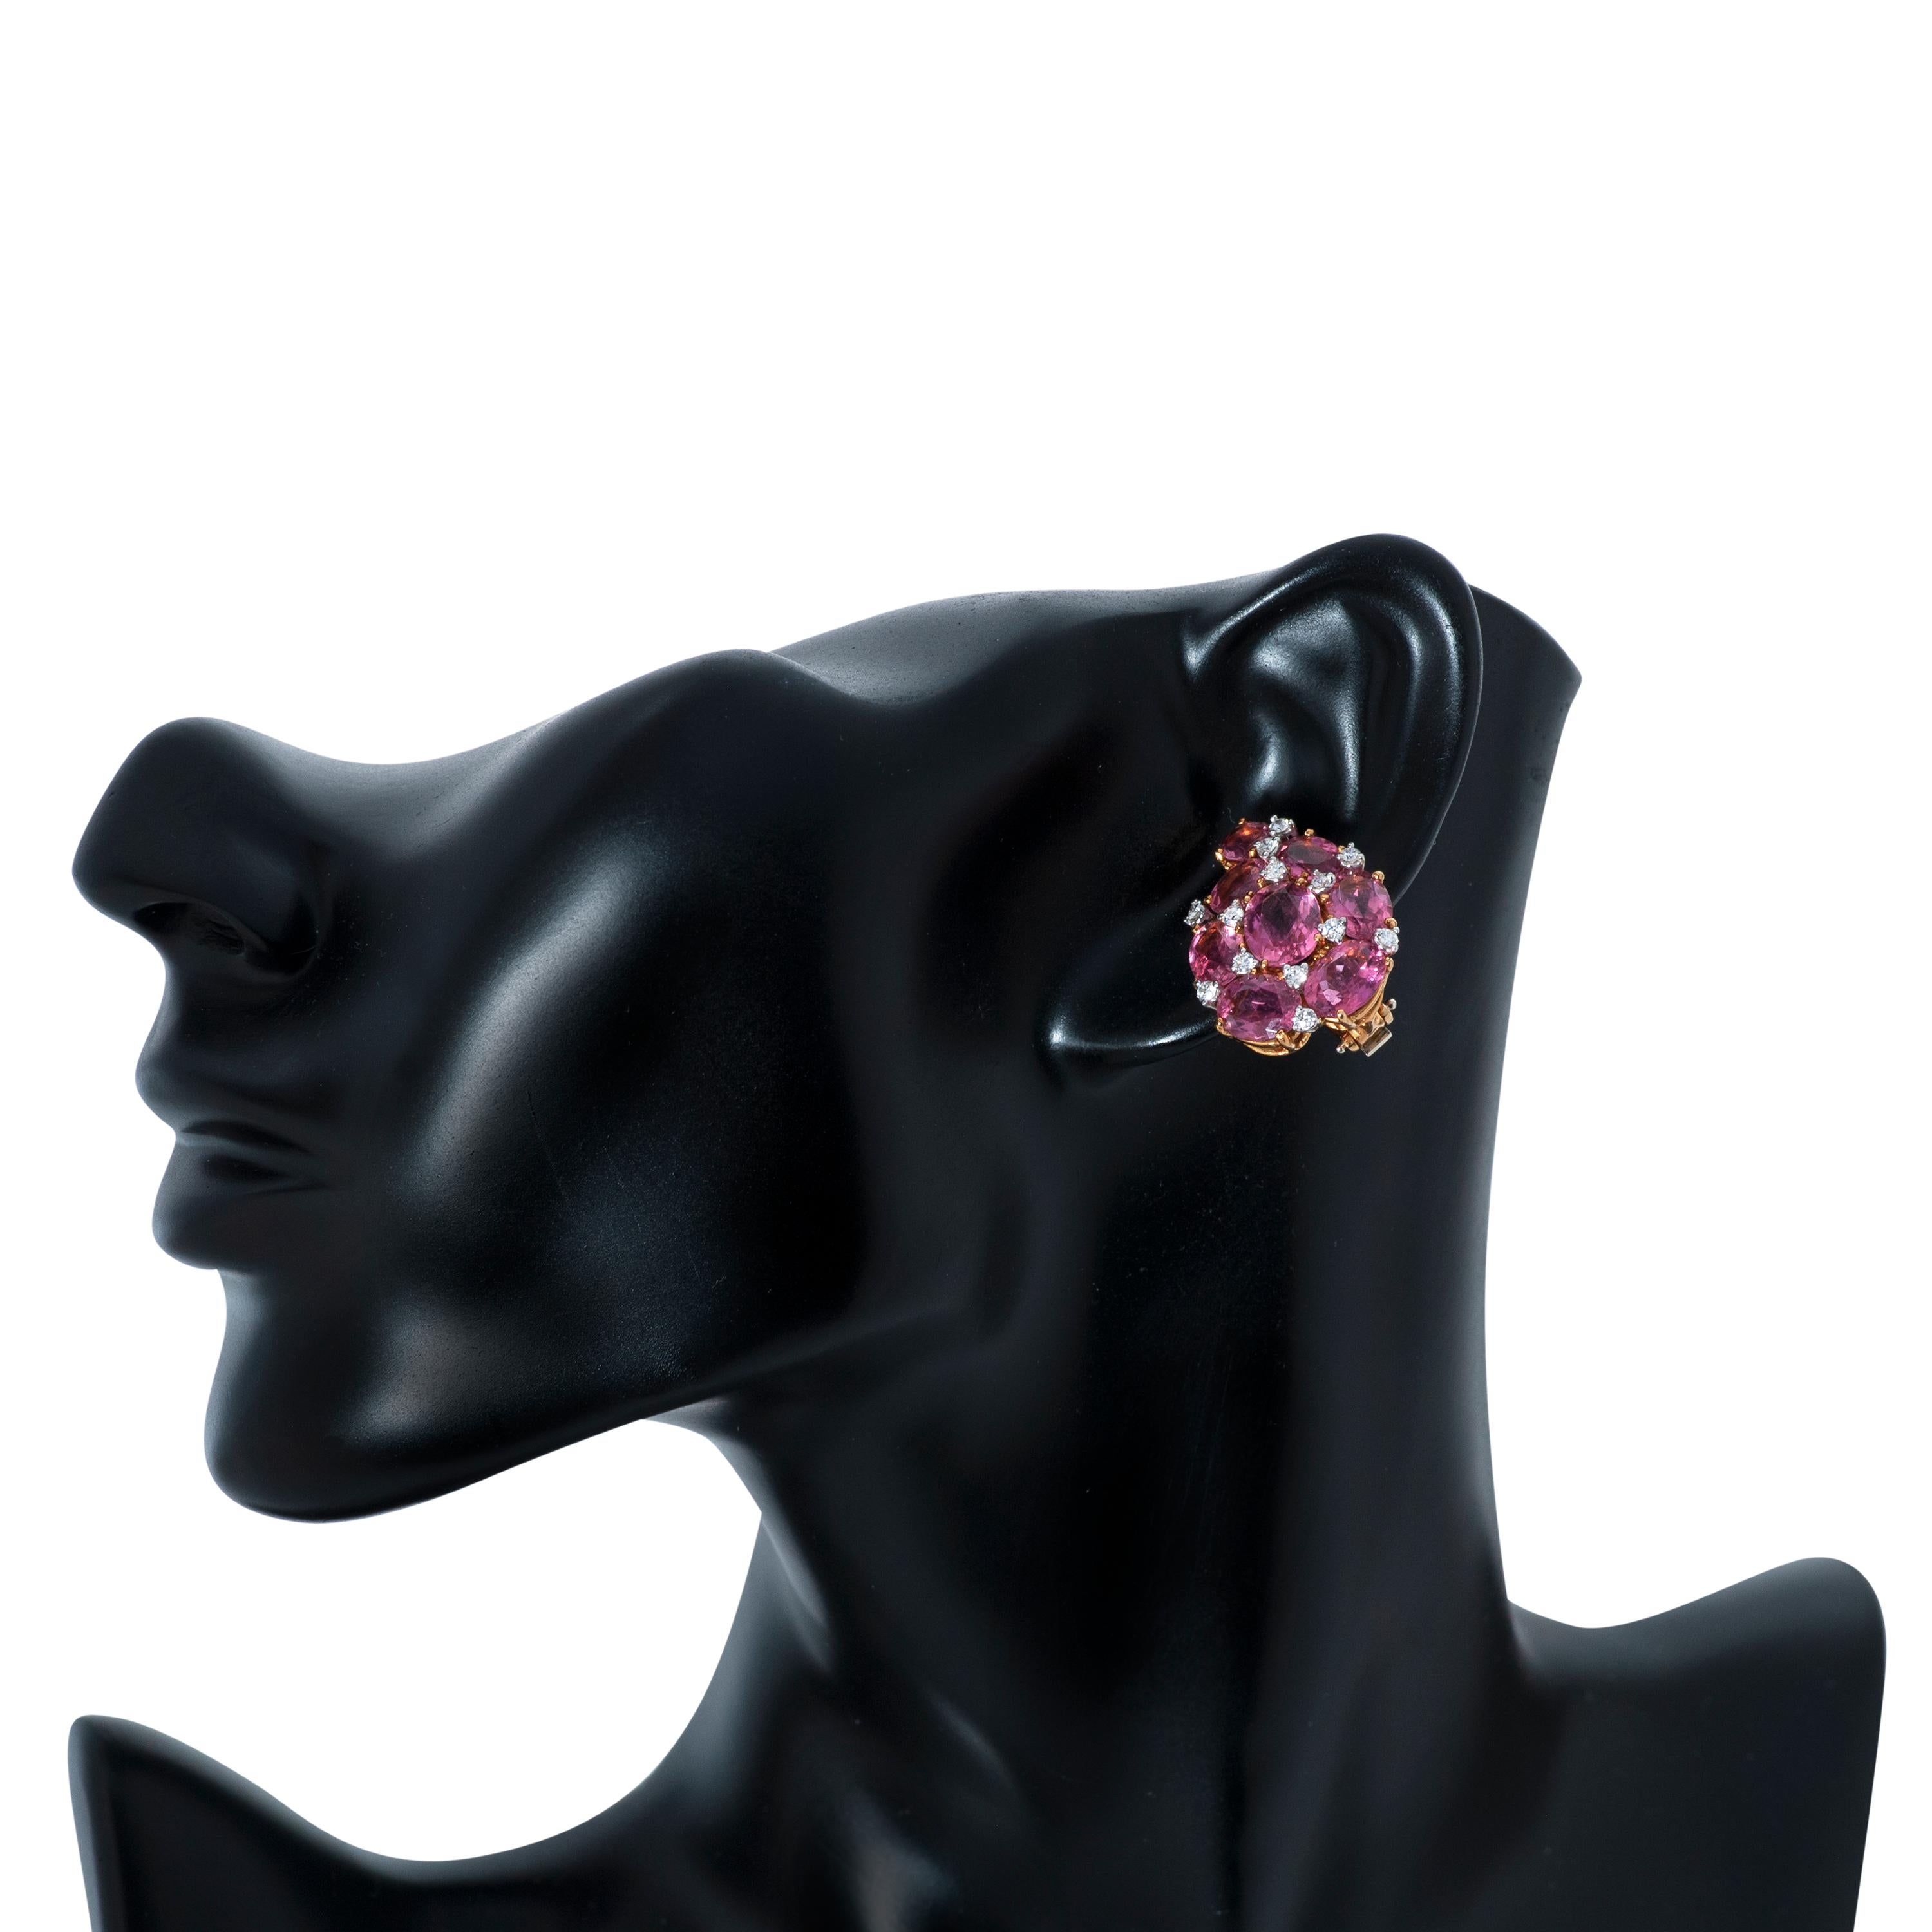 Verdura diamond and pink tourmaline Paisley ear clips in 18k yellow gold and platinum.

These earrings feature 16 oval pink tourmalines totaling approximately 20.00 carats, as well as 26 round brilliant cut diamonds totaling approximately 1.00 cart